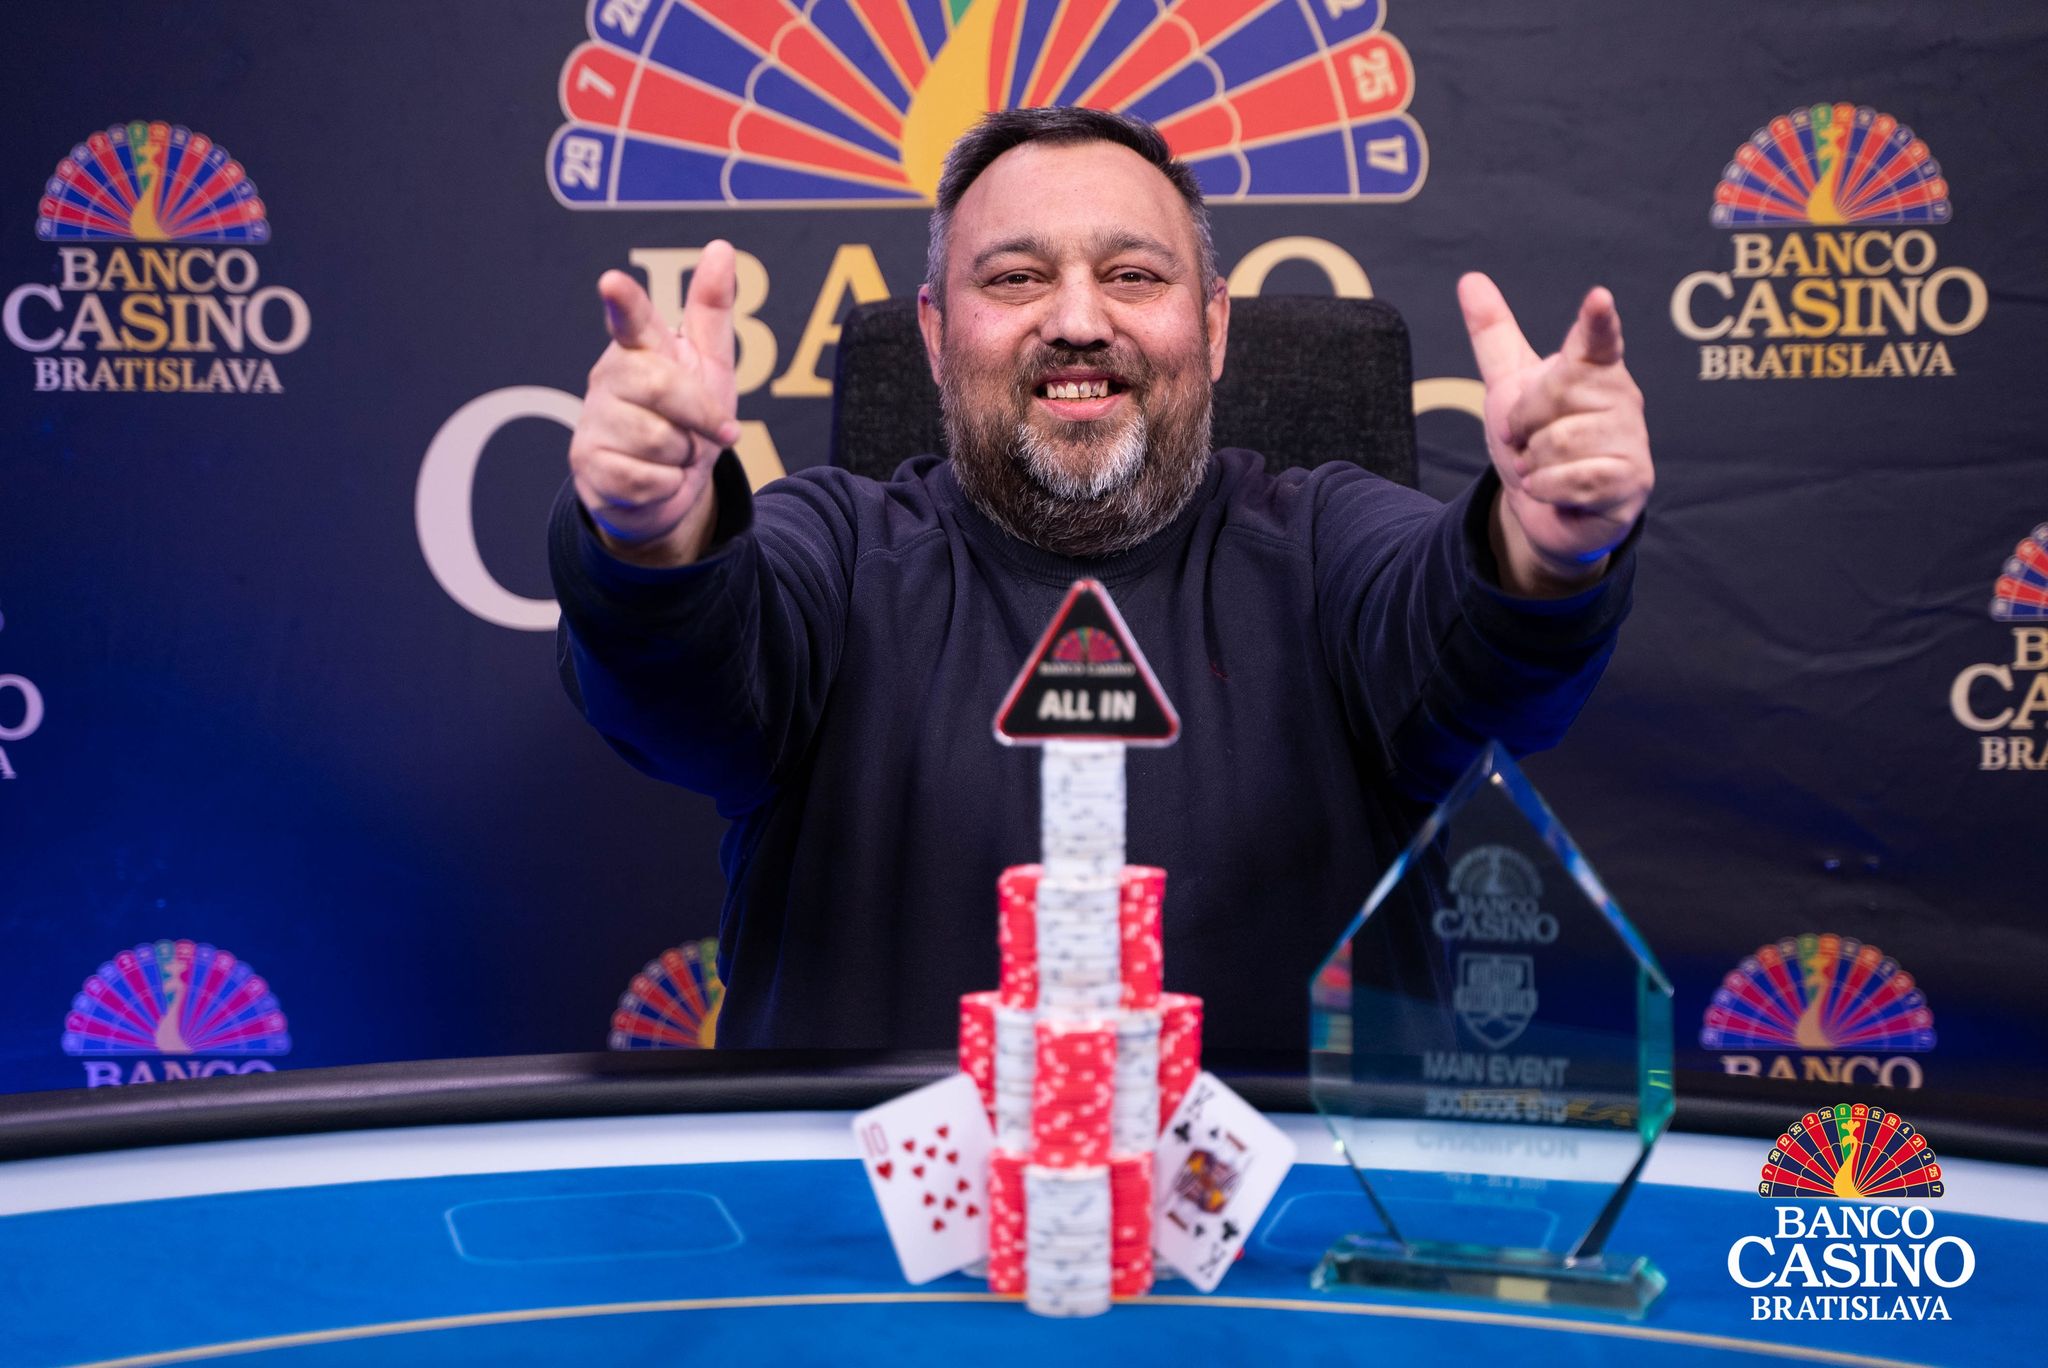 LOKŠO became the champion of the Main Event Slovak Poker Open in Banco Casino with a record win of 61,400€!